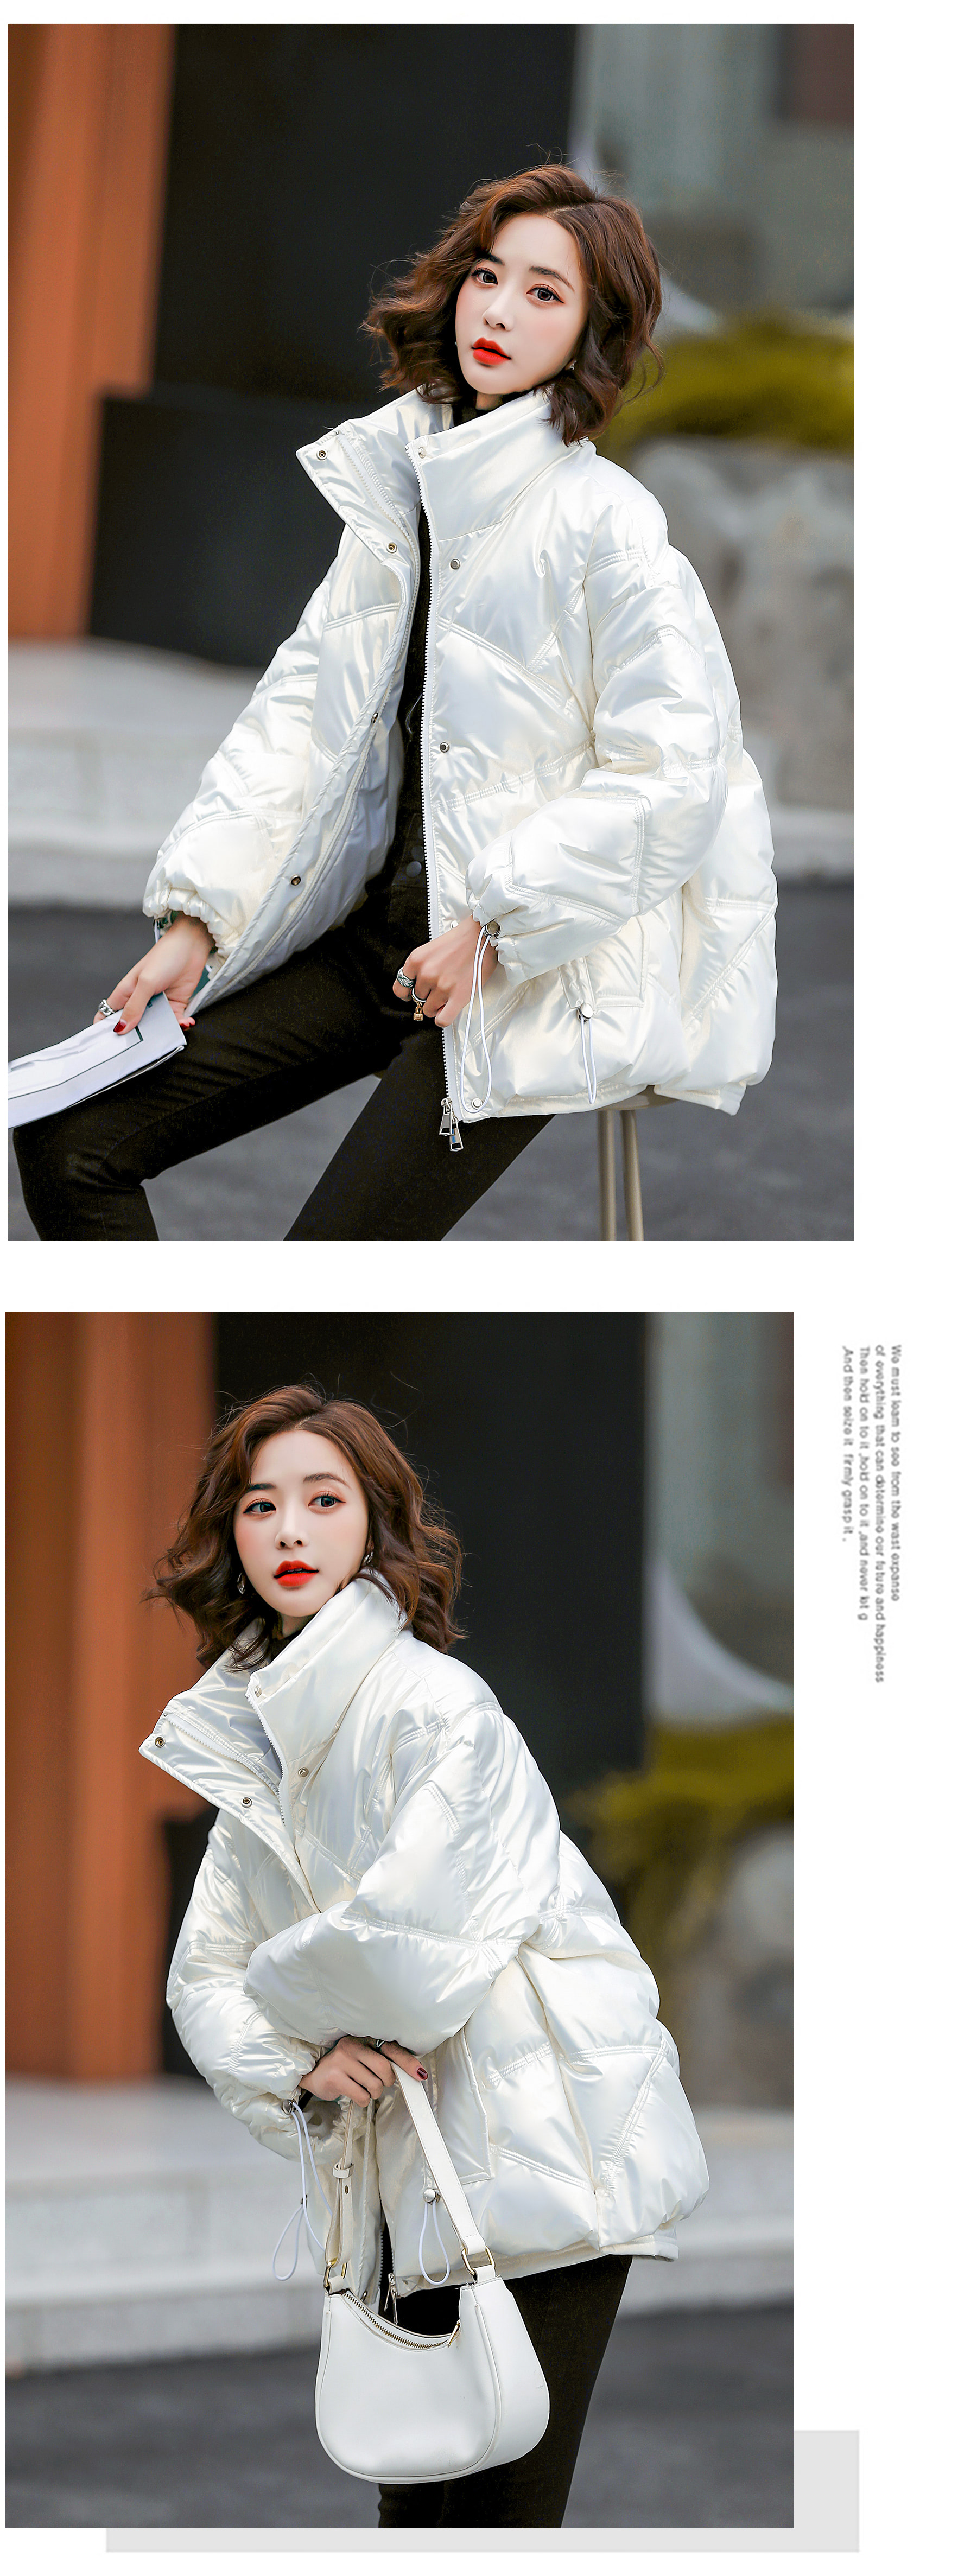 Women's Cropped Puffer Jacket Fashion Winter Outfit Coat15